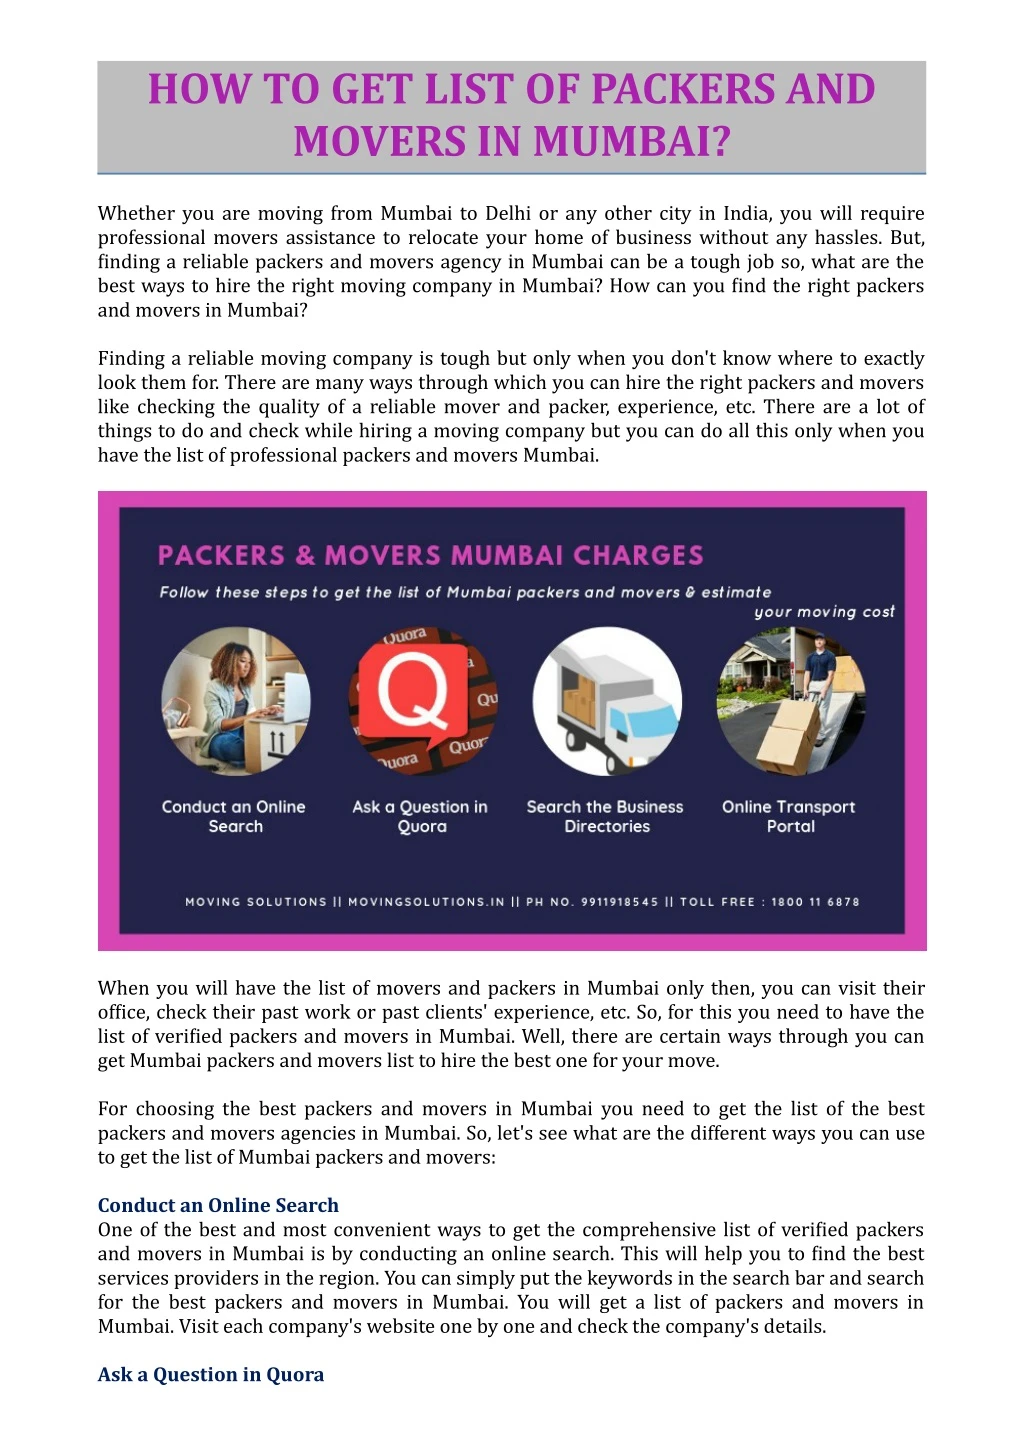 how to get list of packers and movers in mumbai